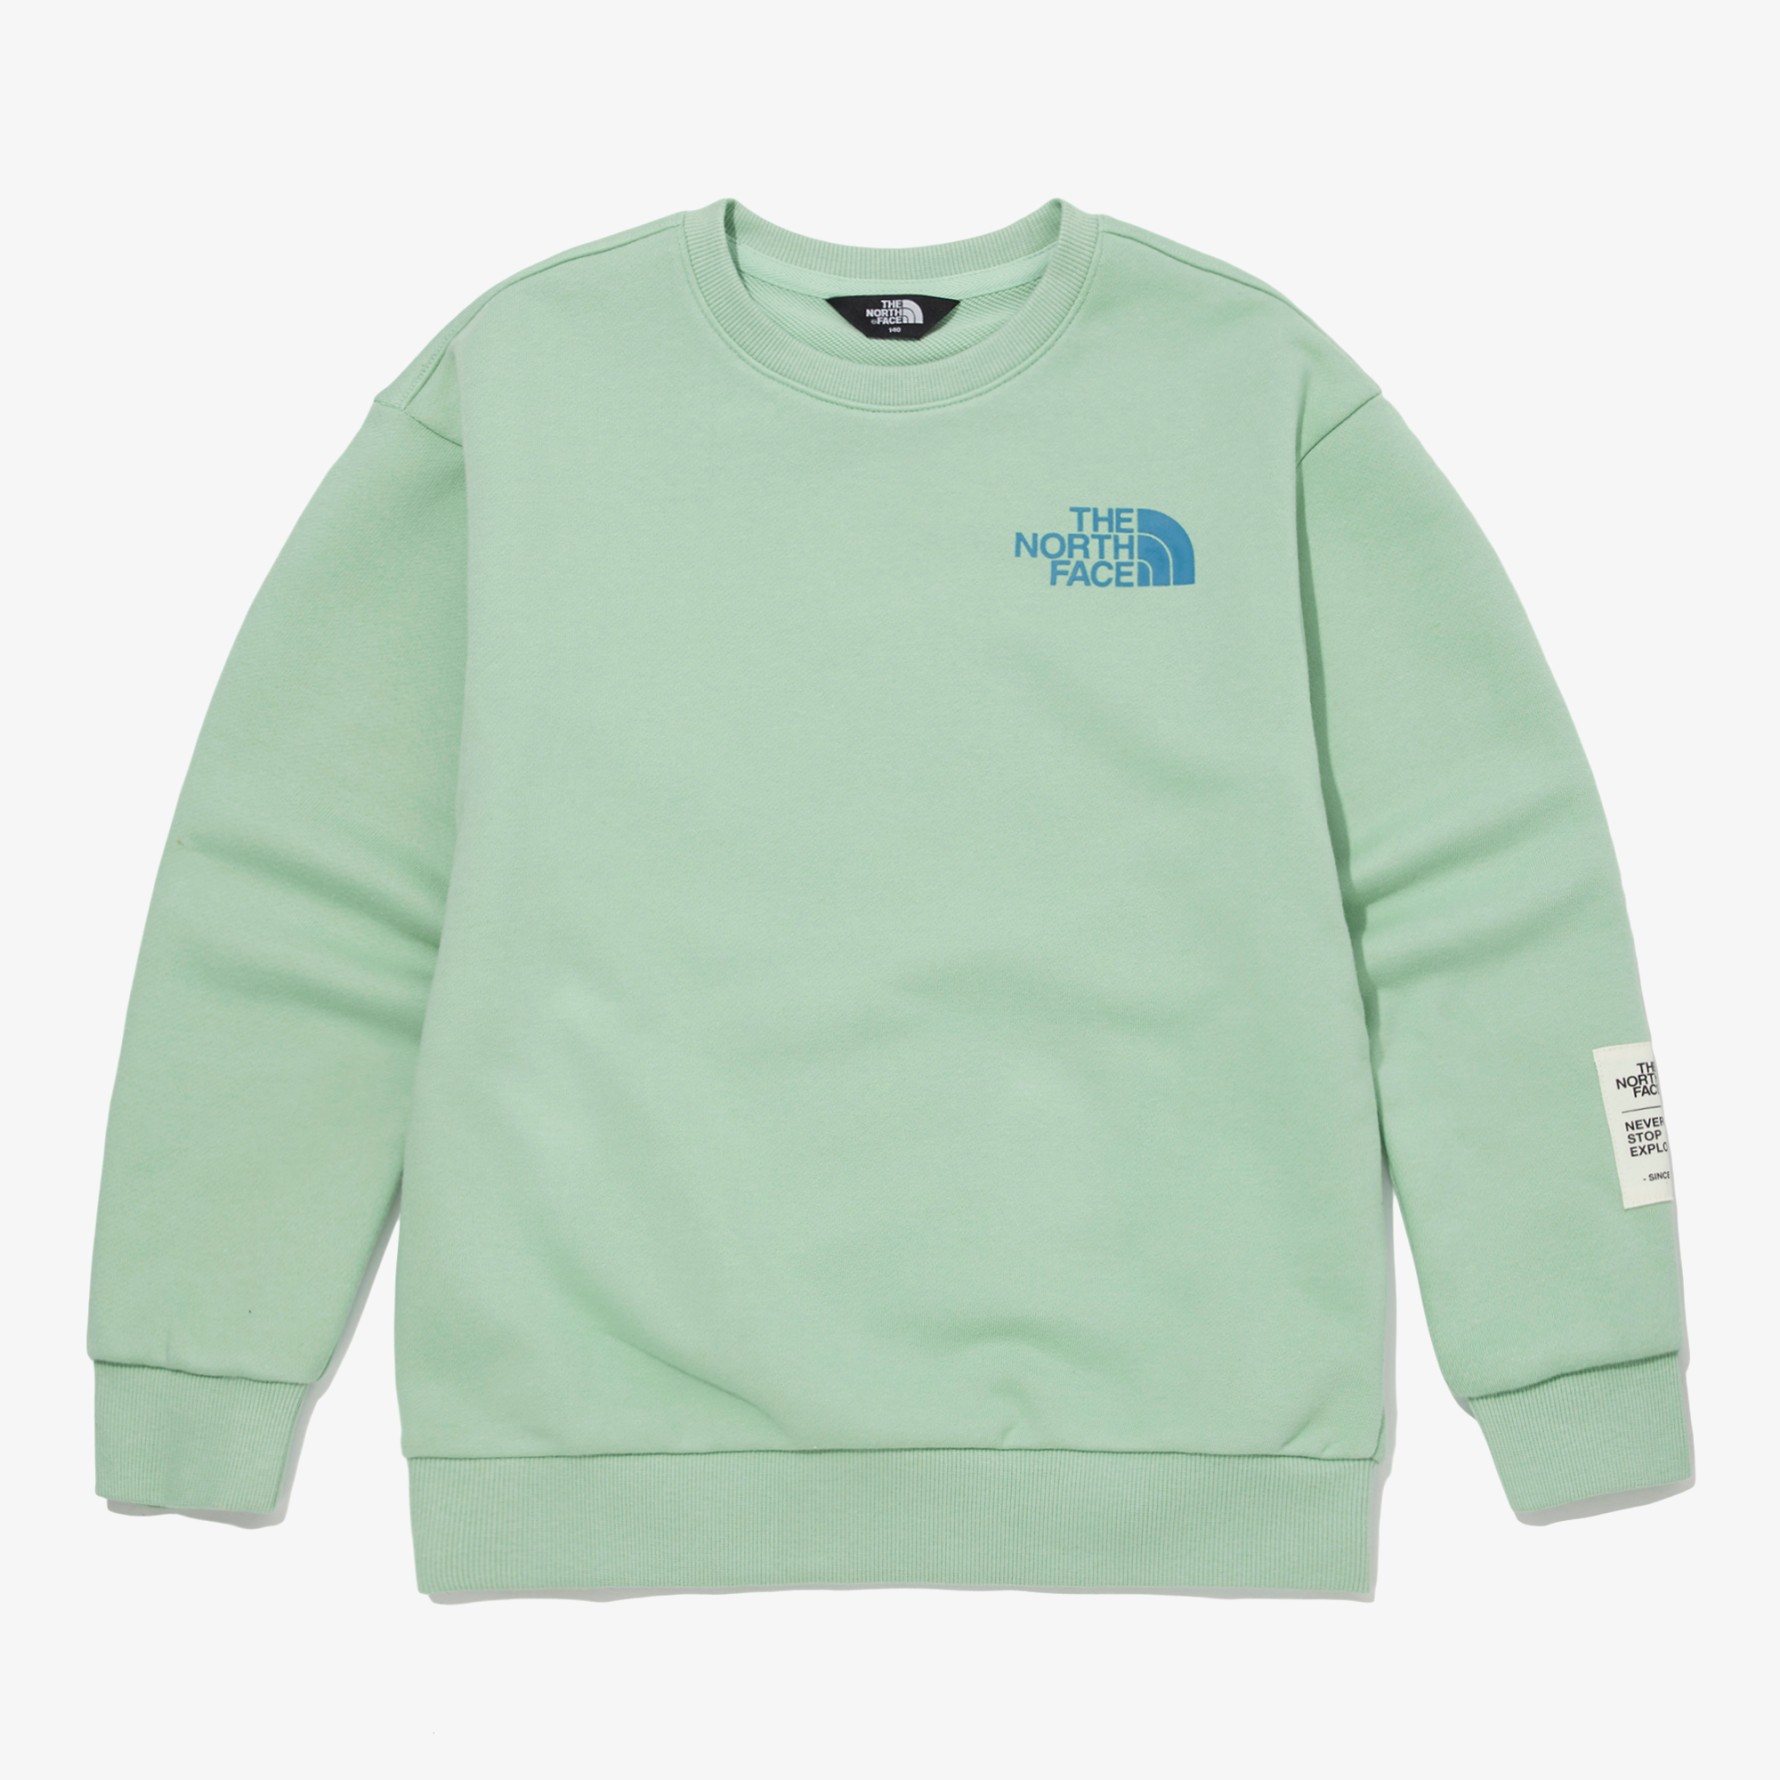 THE NORTH FACE-K’S ESSENTIAL SWEATSHIRTS (GREEN)